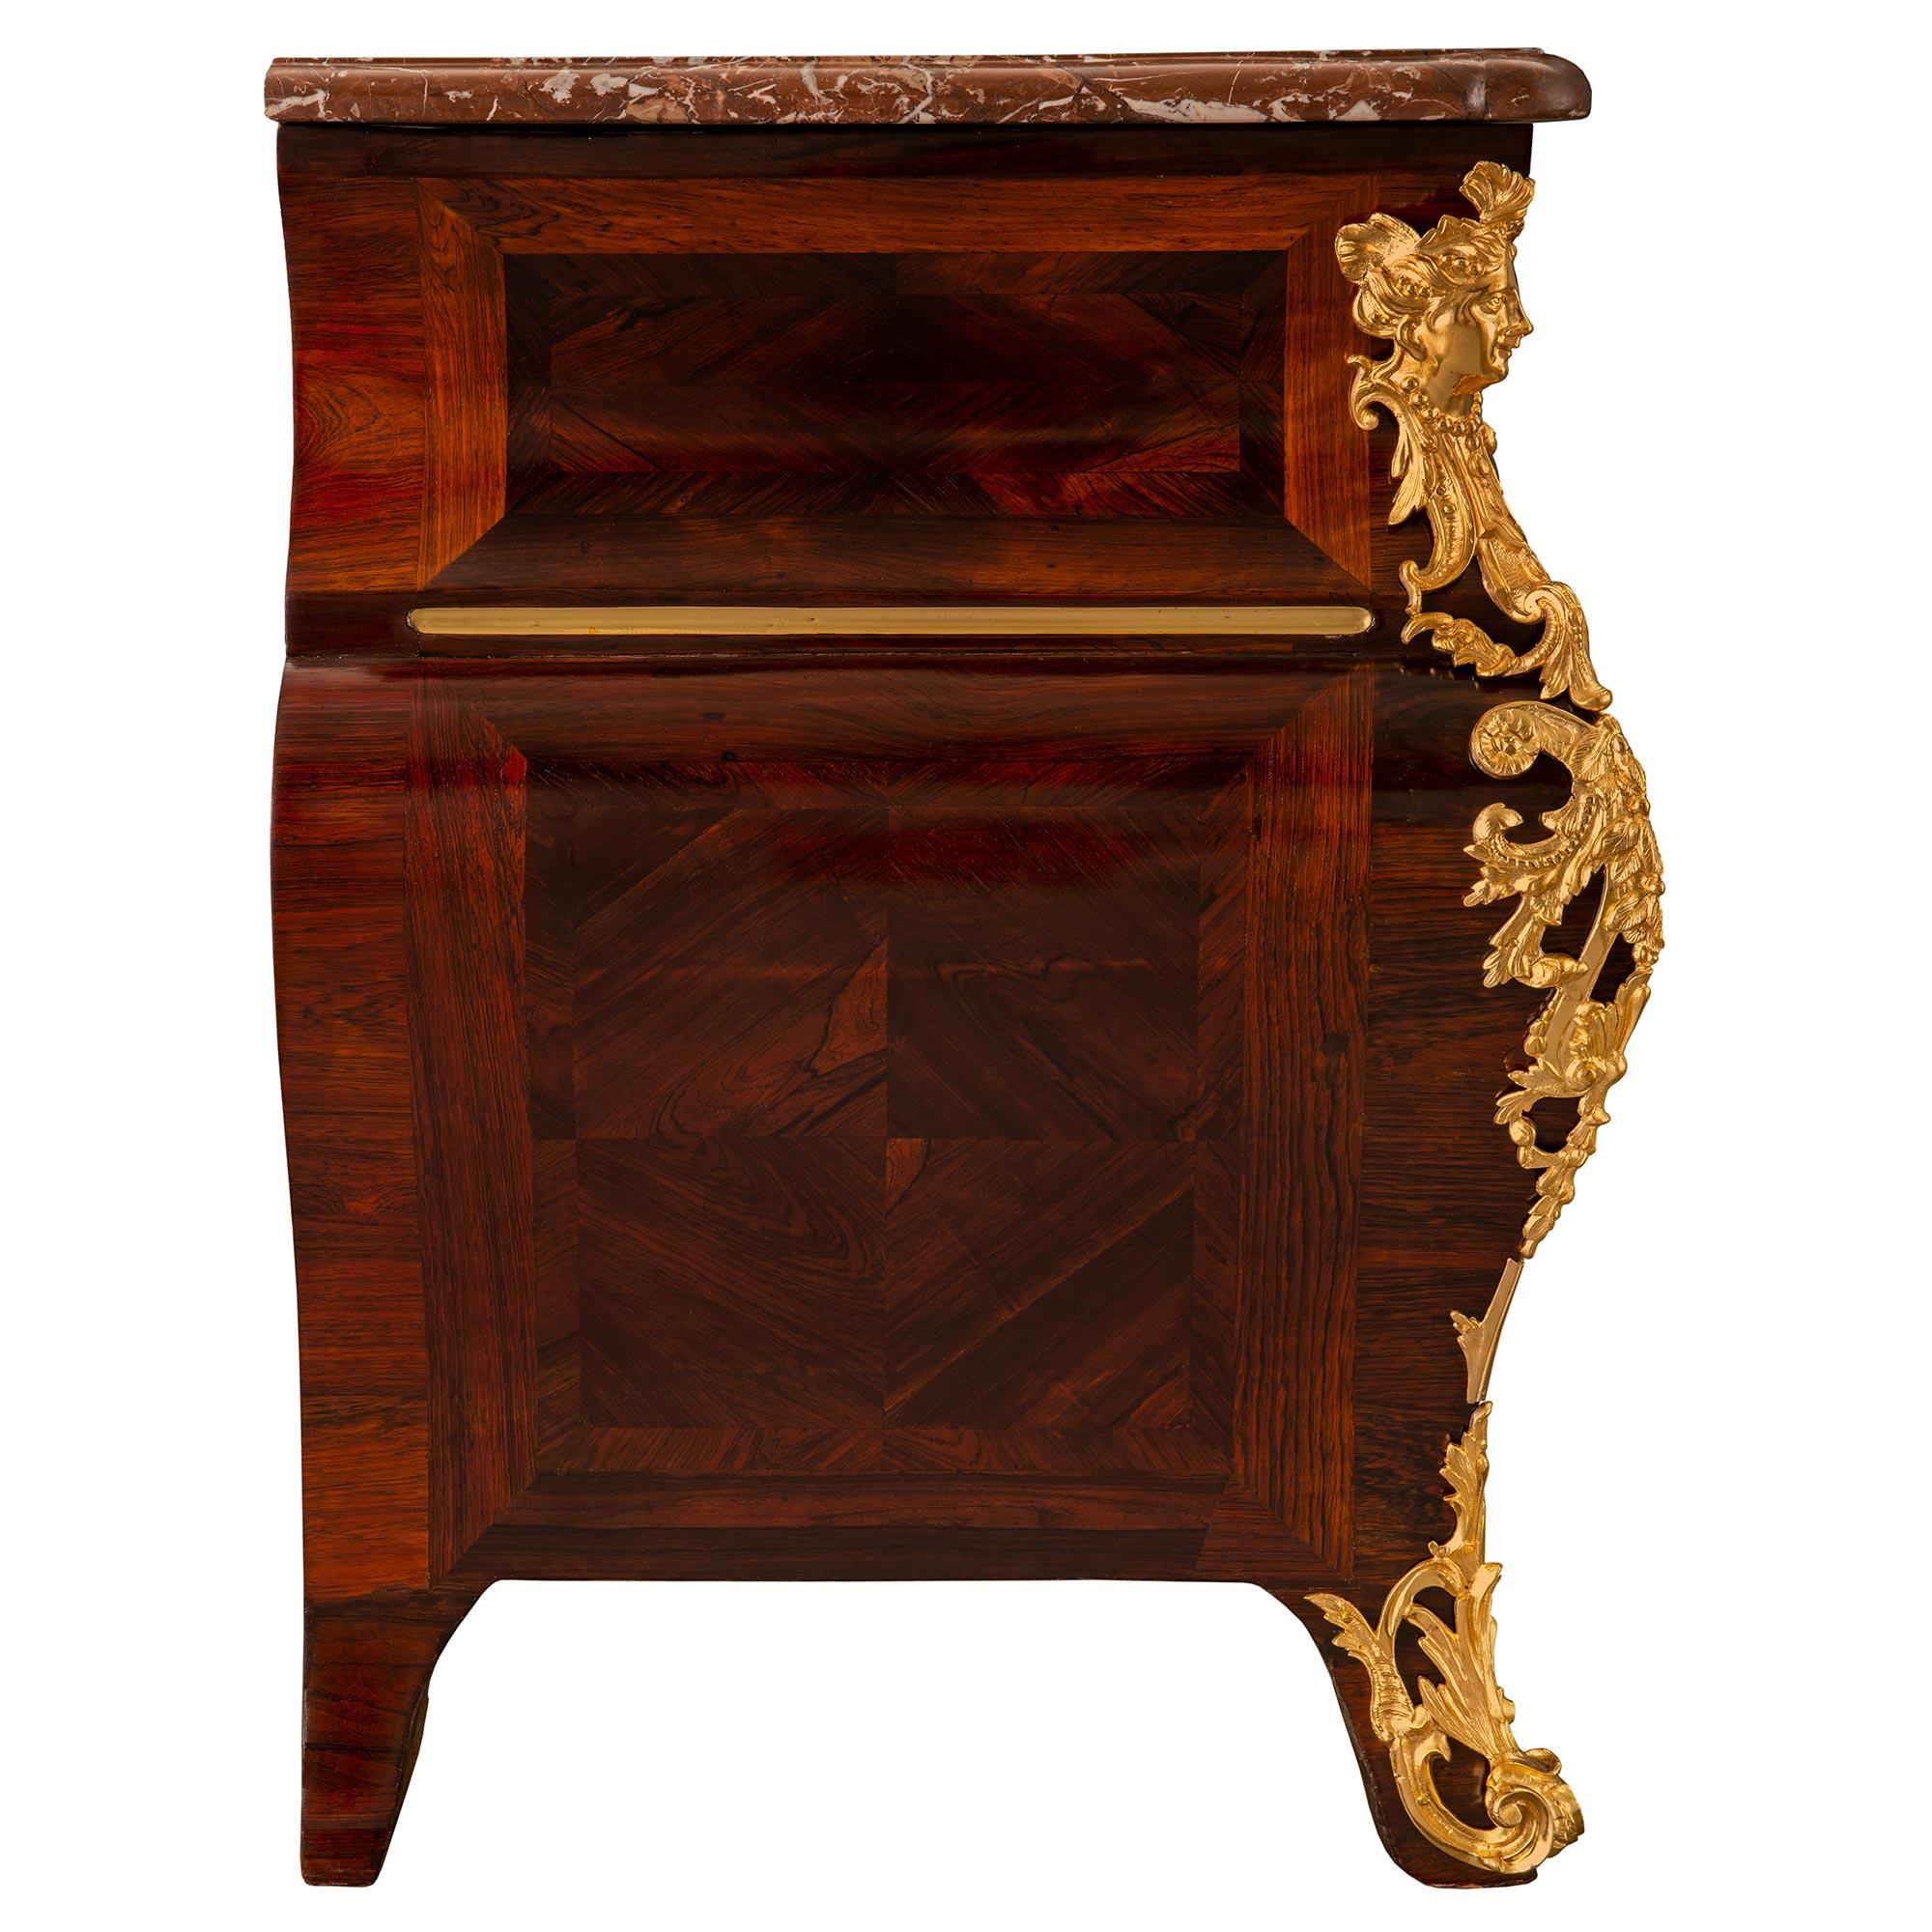 French Mid-18th Century Régence Period Rosewood, Ormolu and Marble Commode For Sale 1